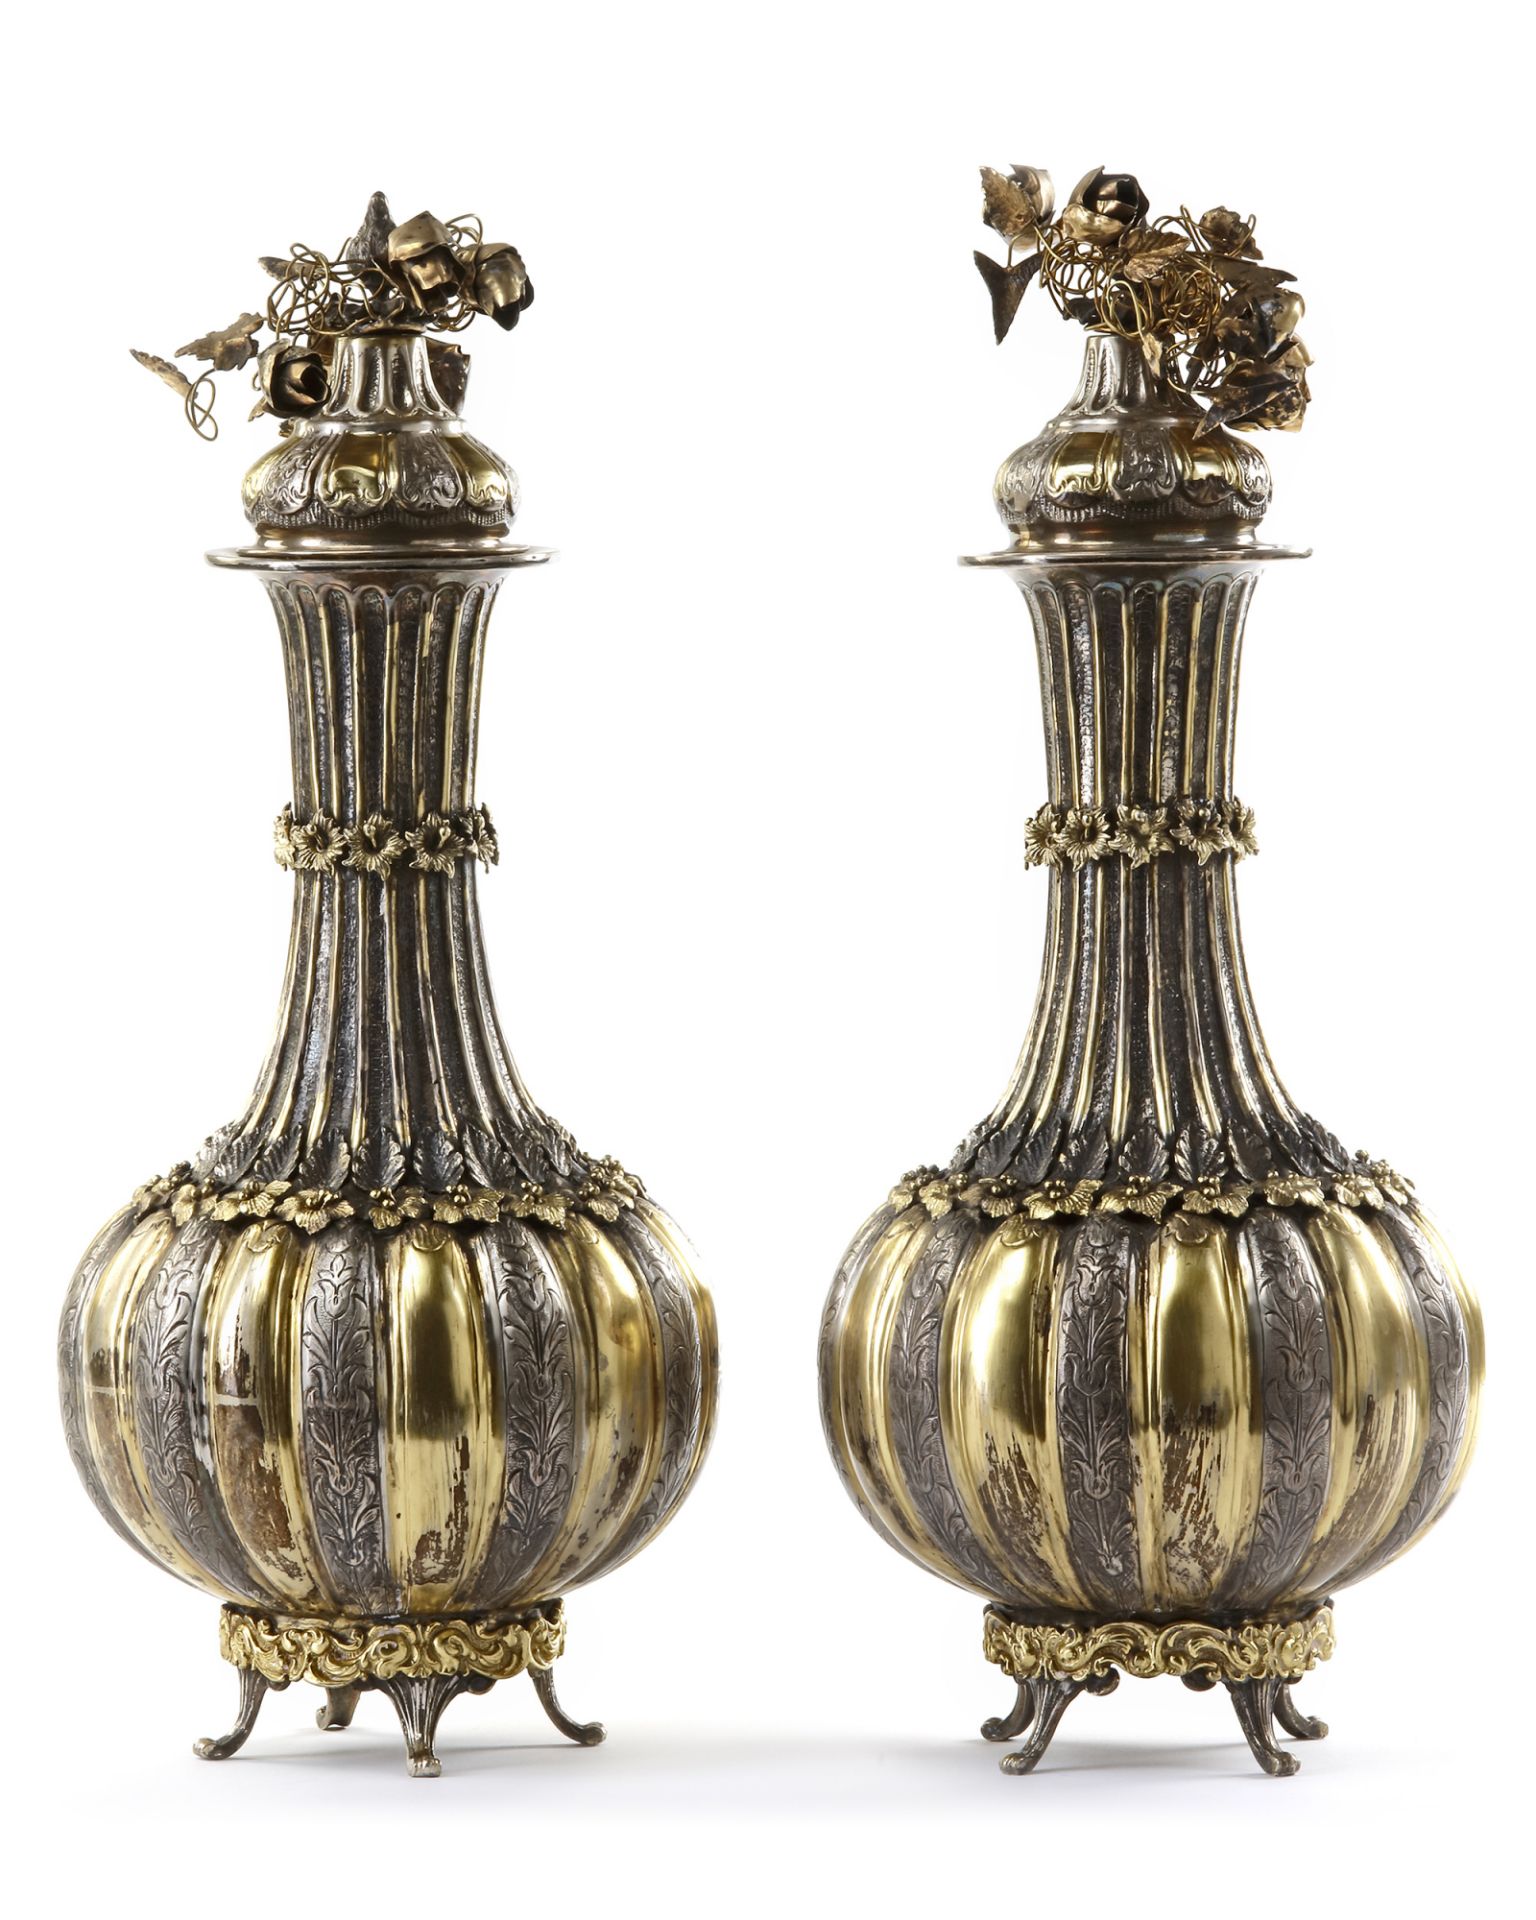 A PAIR OF GILT SILVER VASES WITH COVERS, TURKEY, 19TH CENTURY - Image 8 of 10